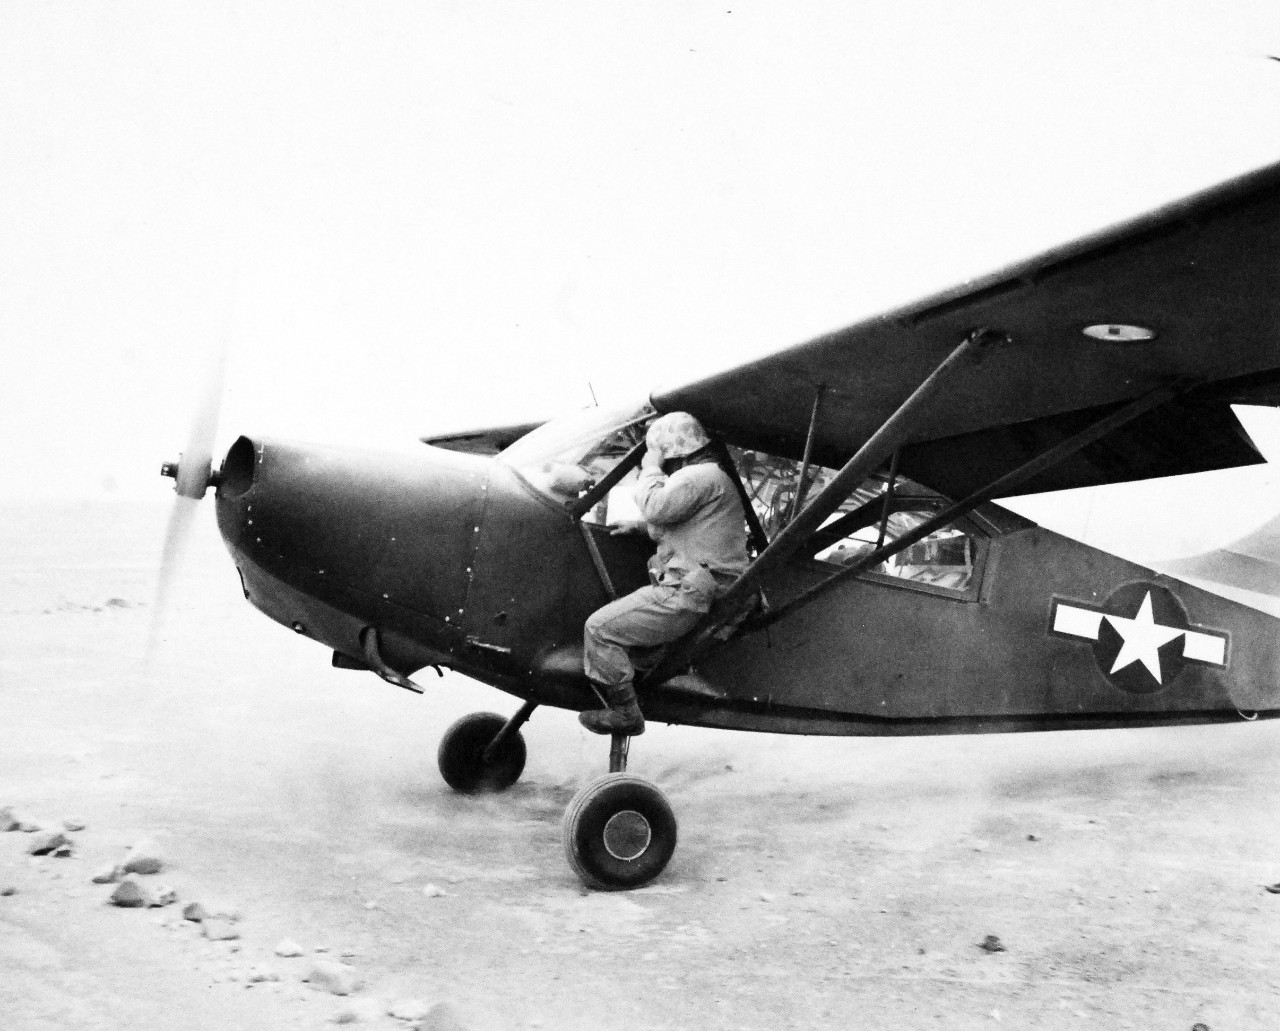 127-GW-298-111091:  Battle for Iwo Jima, February-March 1945.   The first Stinson OY-1 “Sentinel” plane piloted by Lieutenant H. Olson taxis down the strip to join his other buddy who flew with him to Iwo Jima.  Photographed by Dodds, February 26, 1945.  Official U.S. Marine Corps photograph, now in the collections of the National Archives.  (2016/02/17).